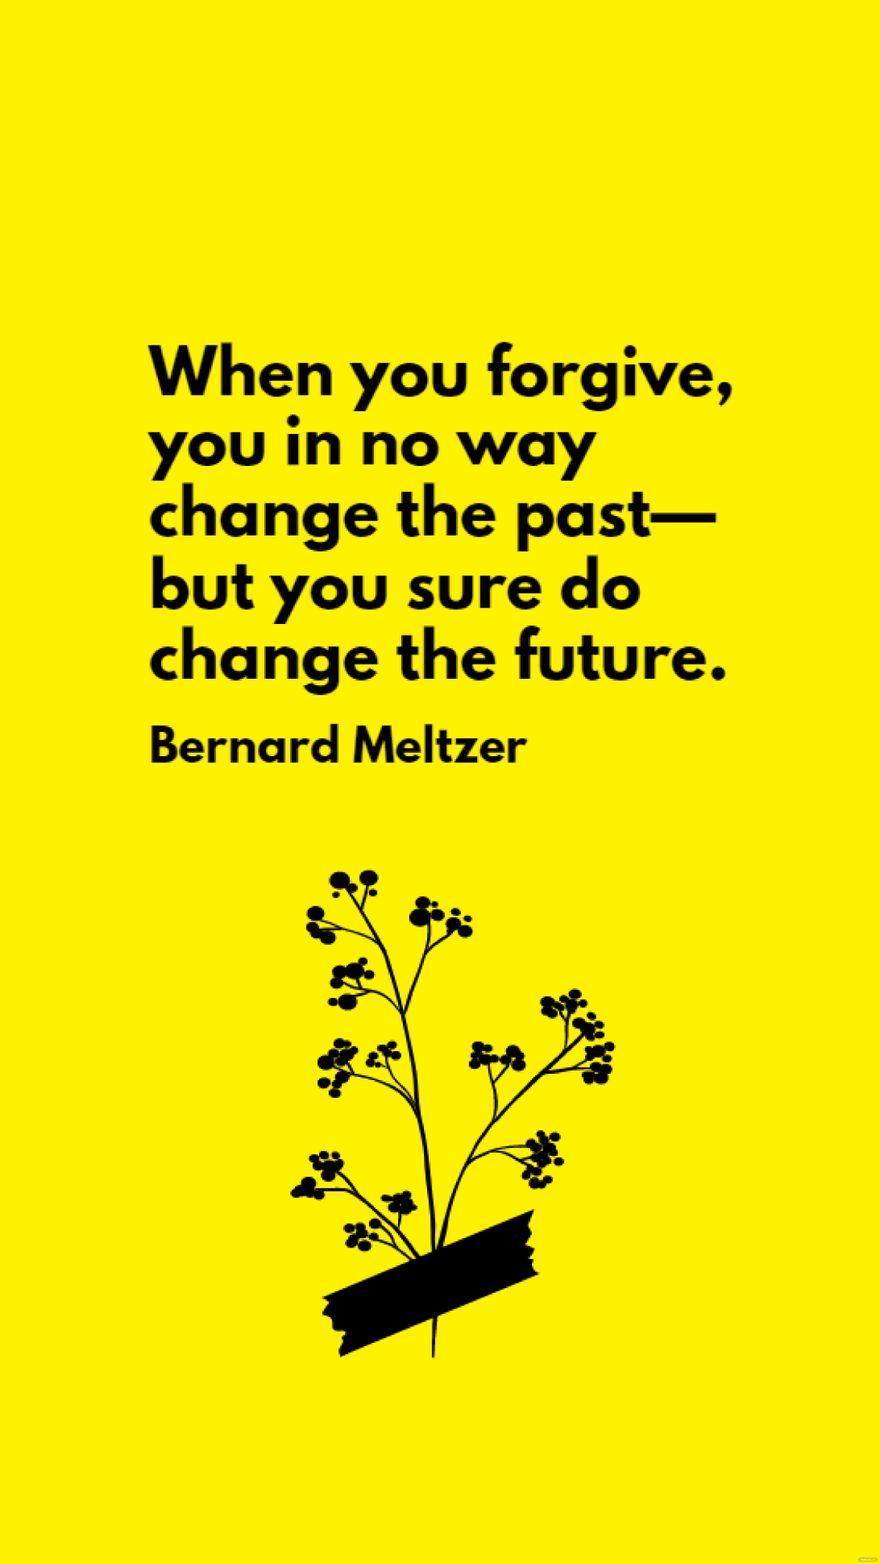 Bernard Meltzer - When you forgive, you in no way change the past - but you sure do change the future. in JPG